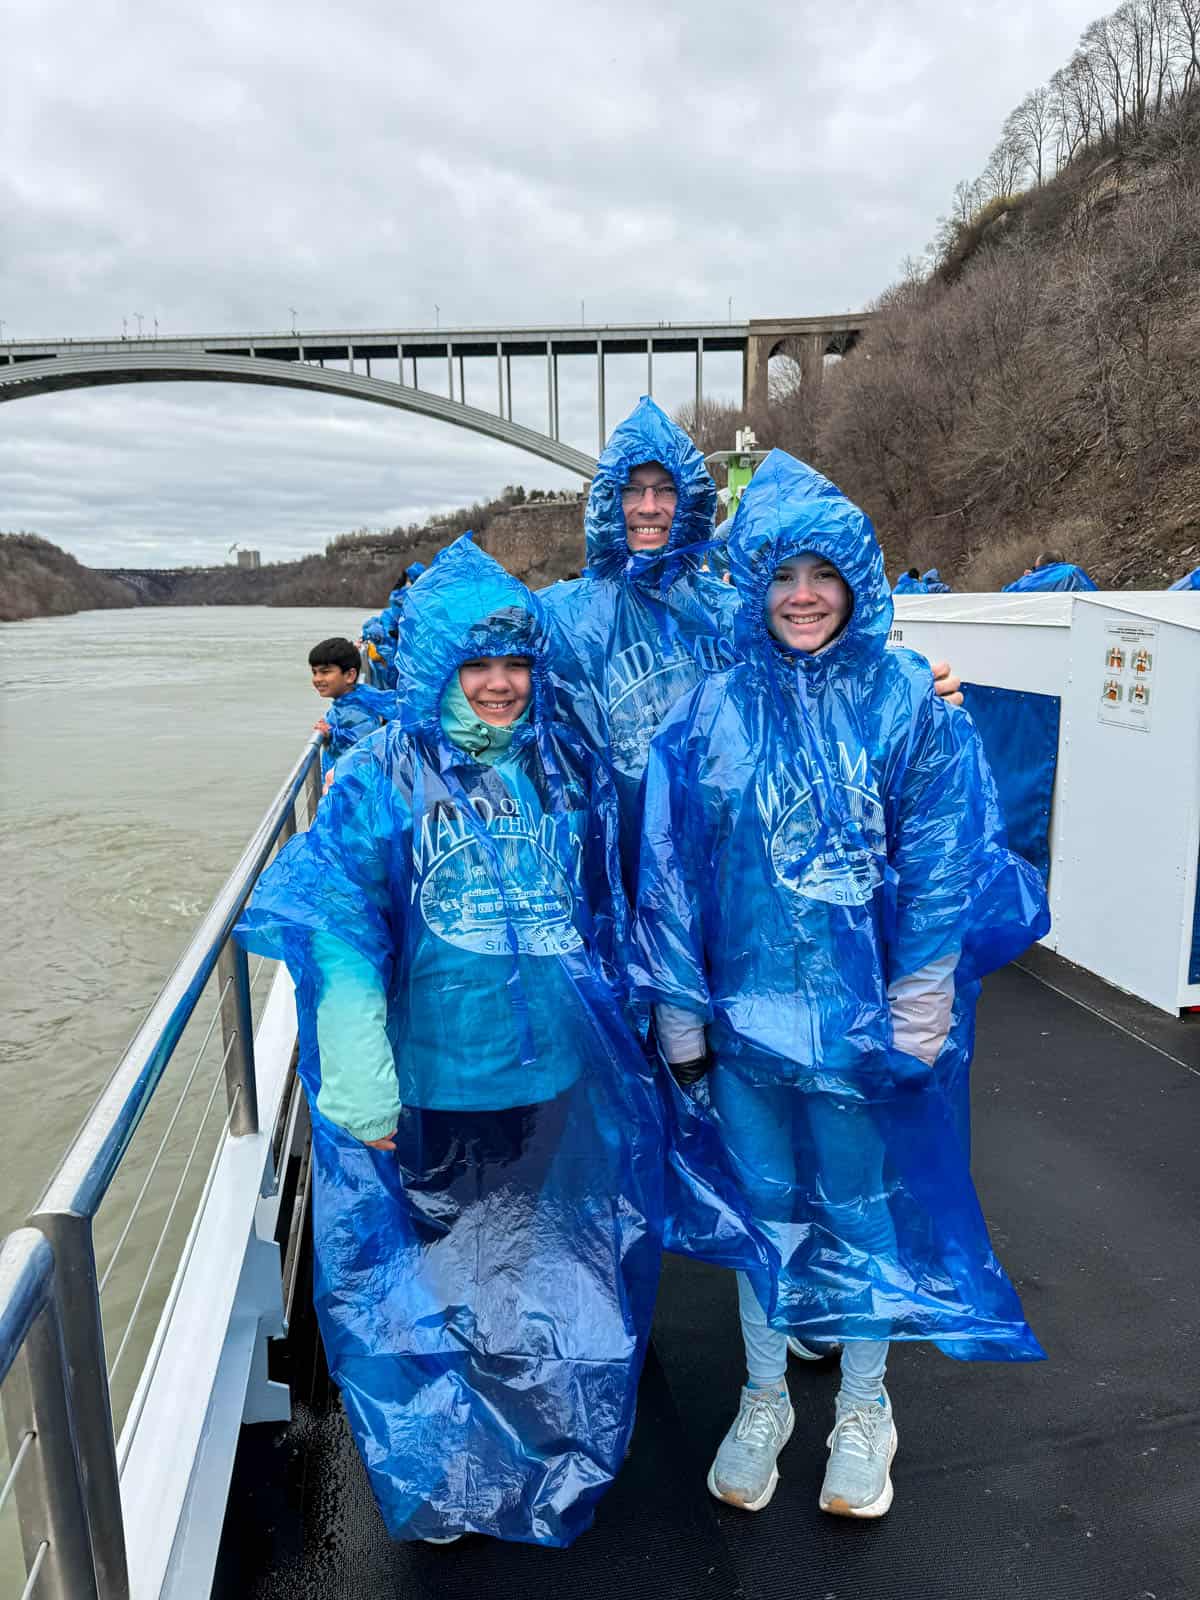 A dad and two daughters in blue Maid of the Mist ponchos.